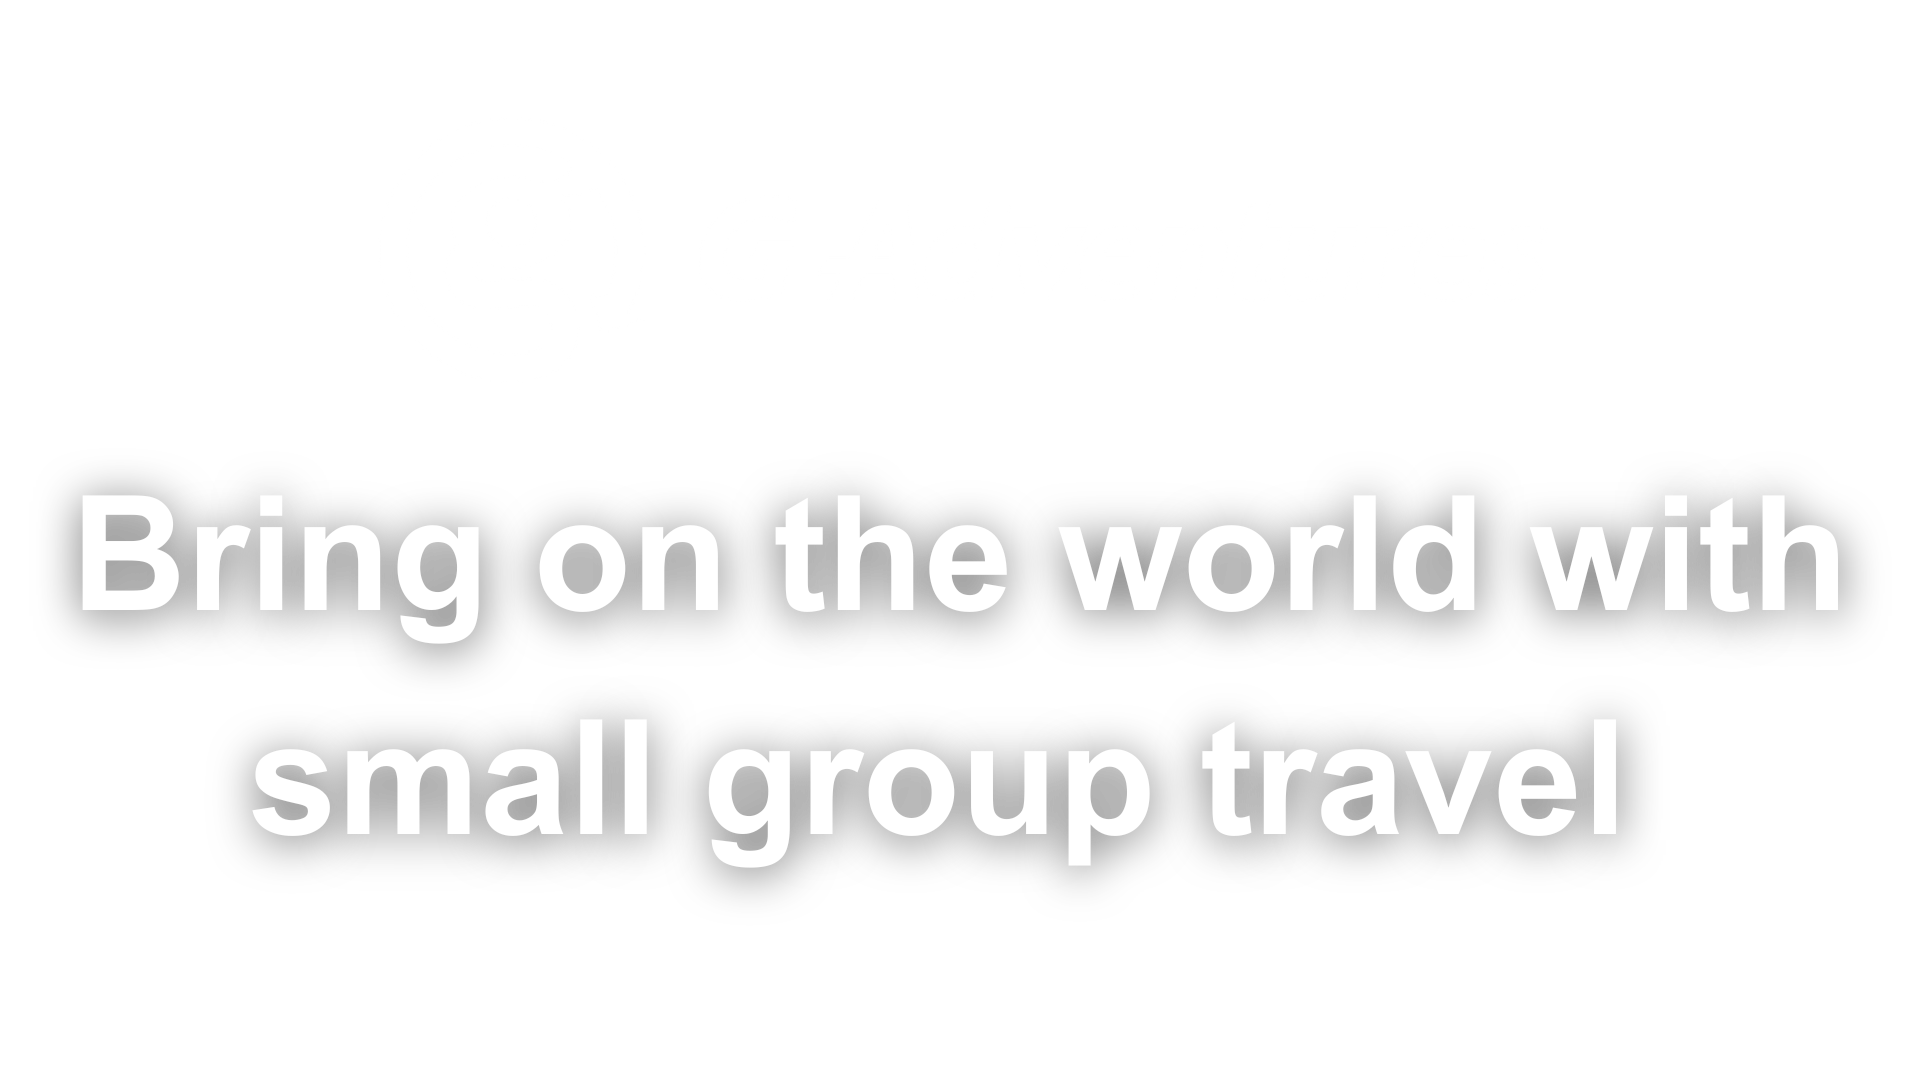 World with G Adventures